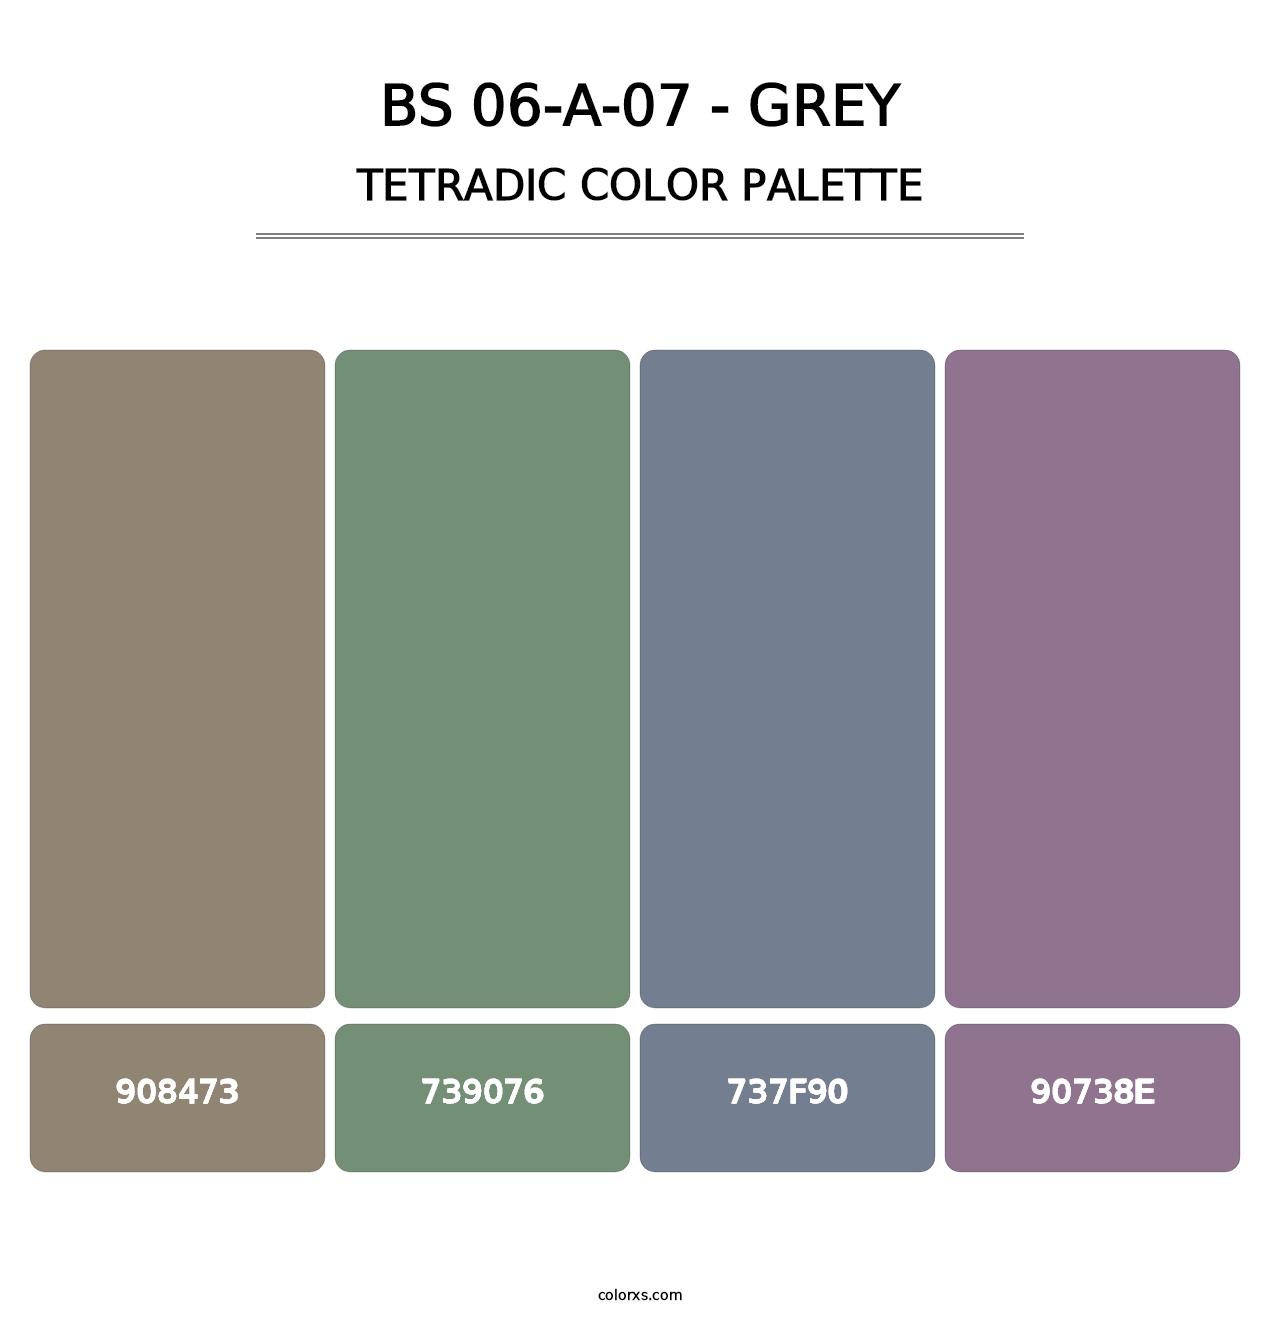 BS 06-A-07 - Grey - Tetradic Color Palette